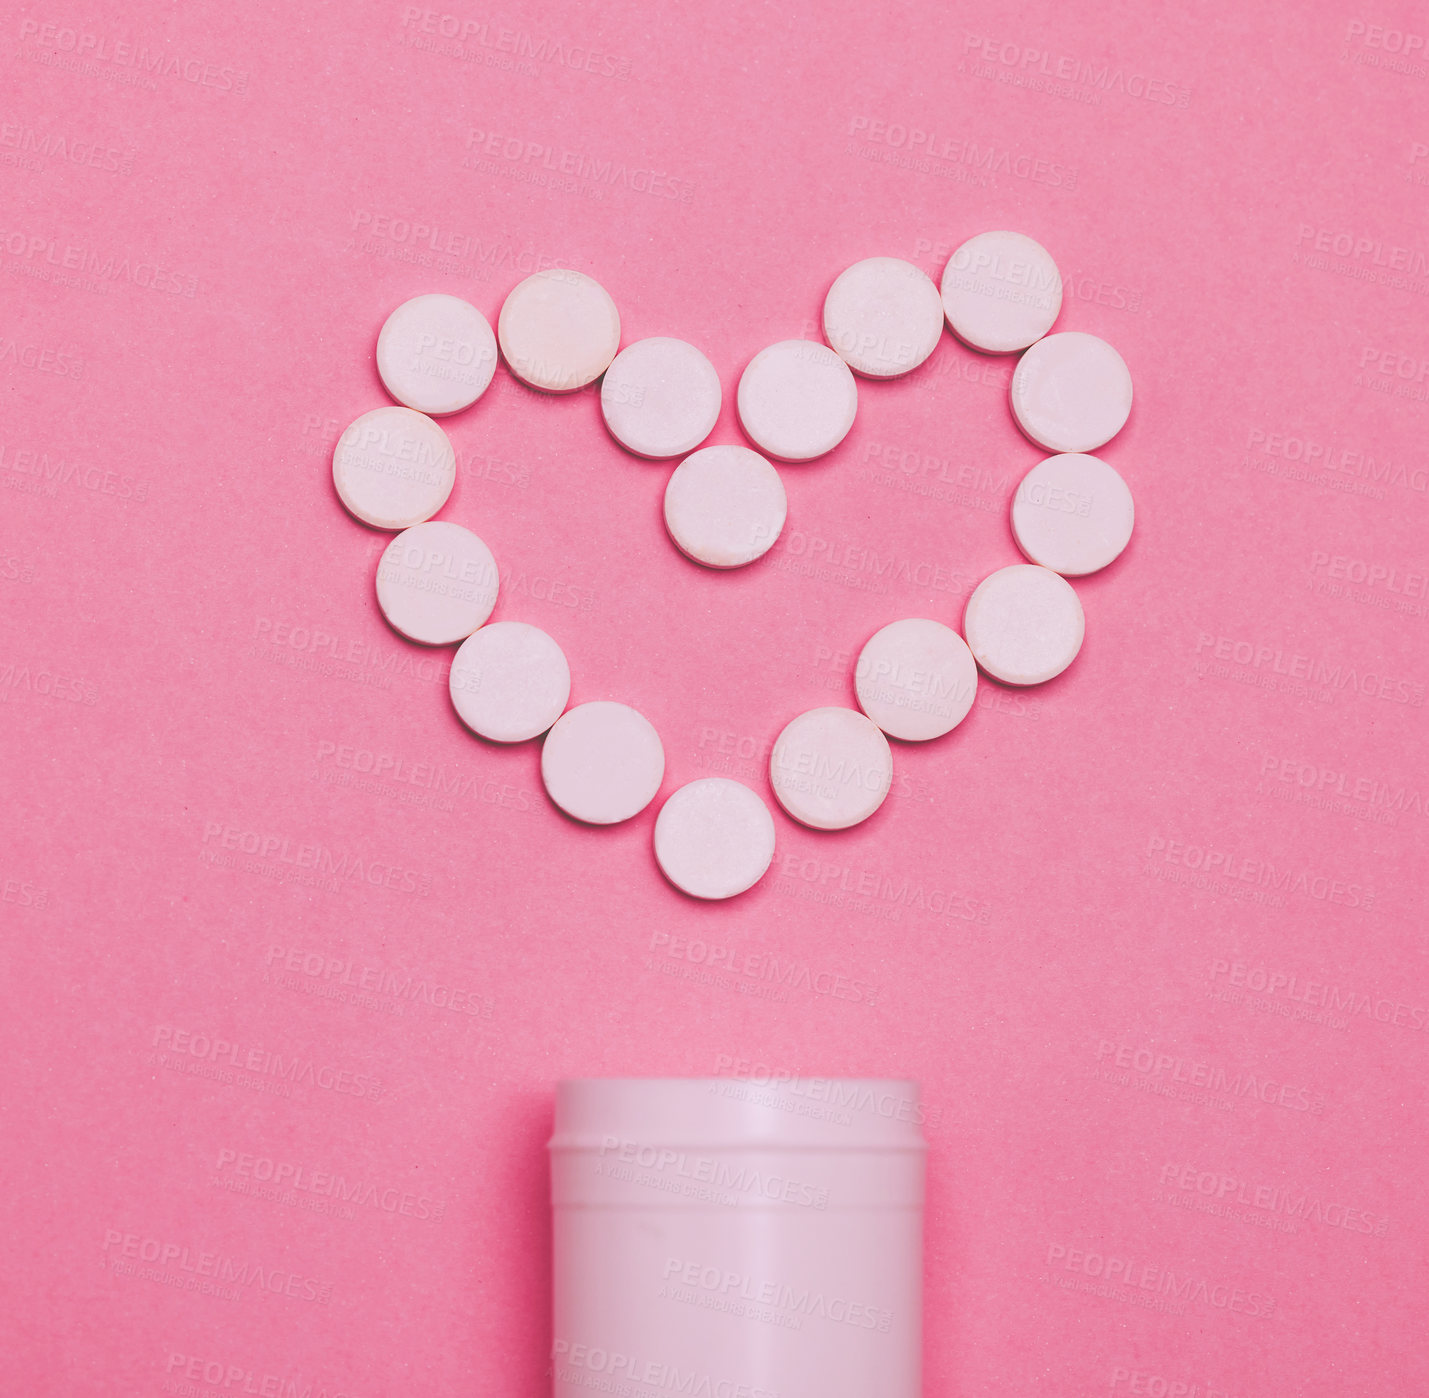 Buy stock photo Studio shot of pills forming a heart against a pink background